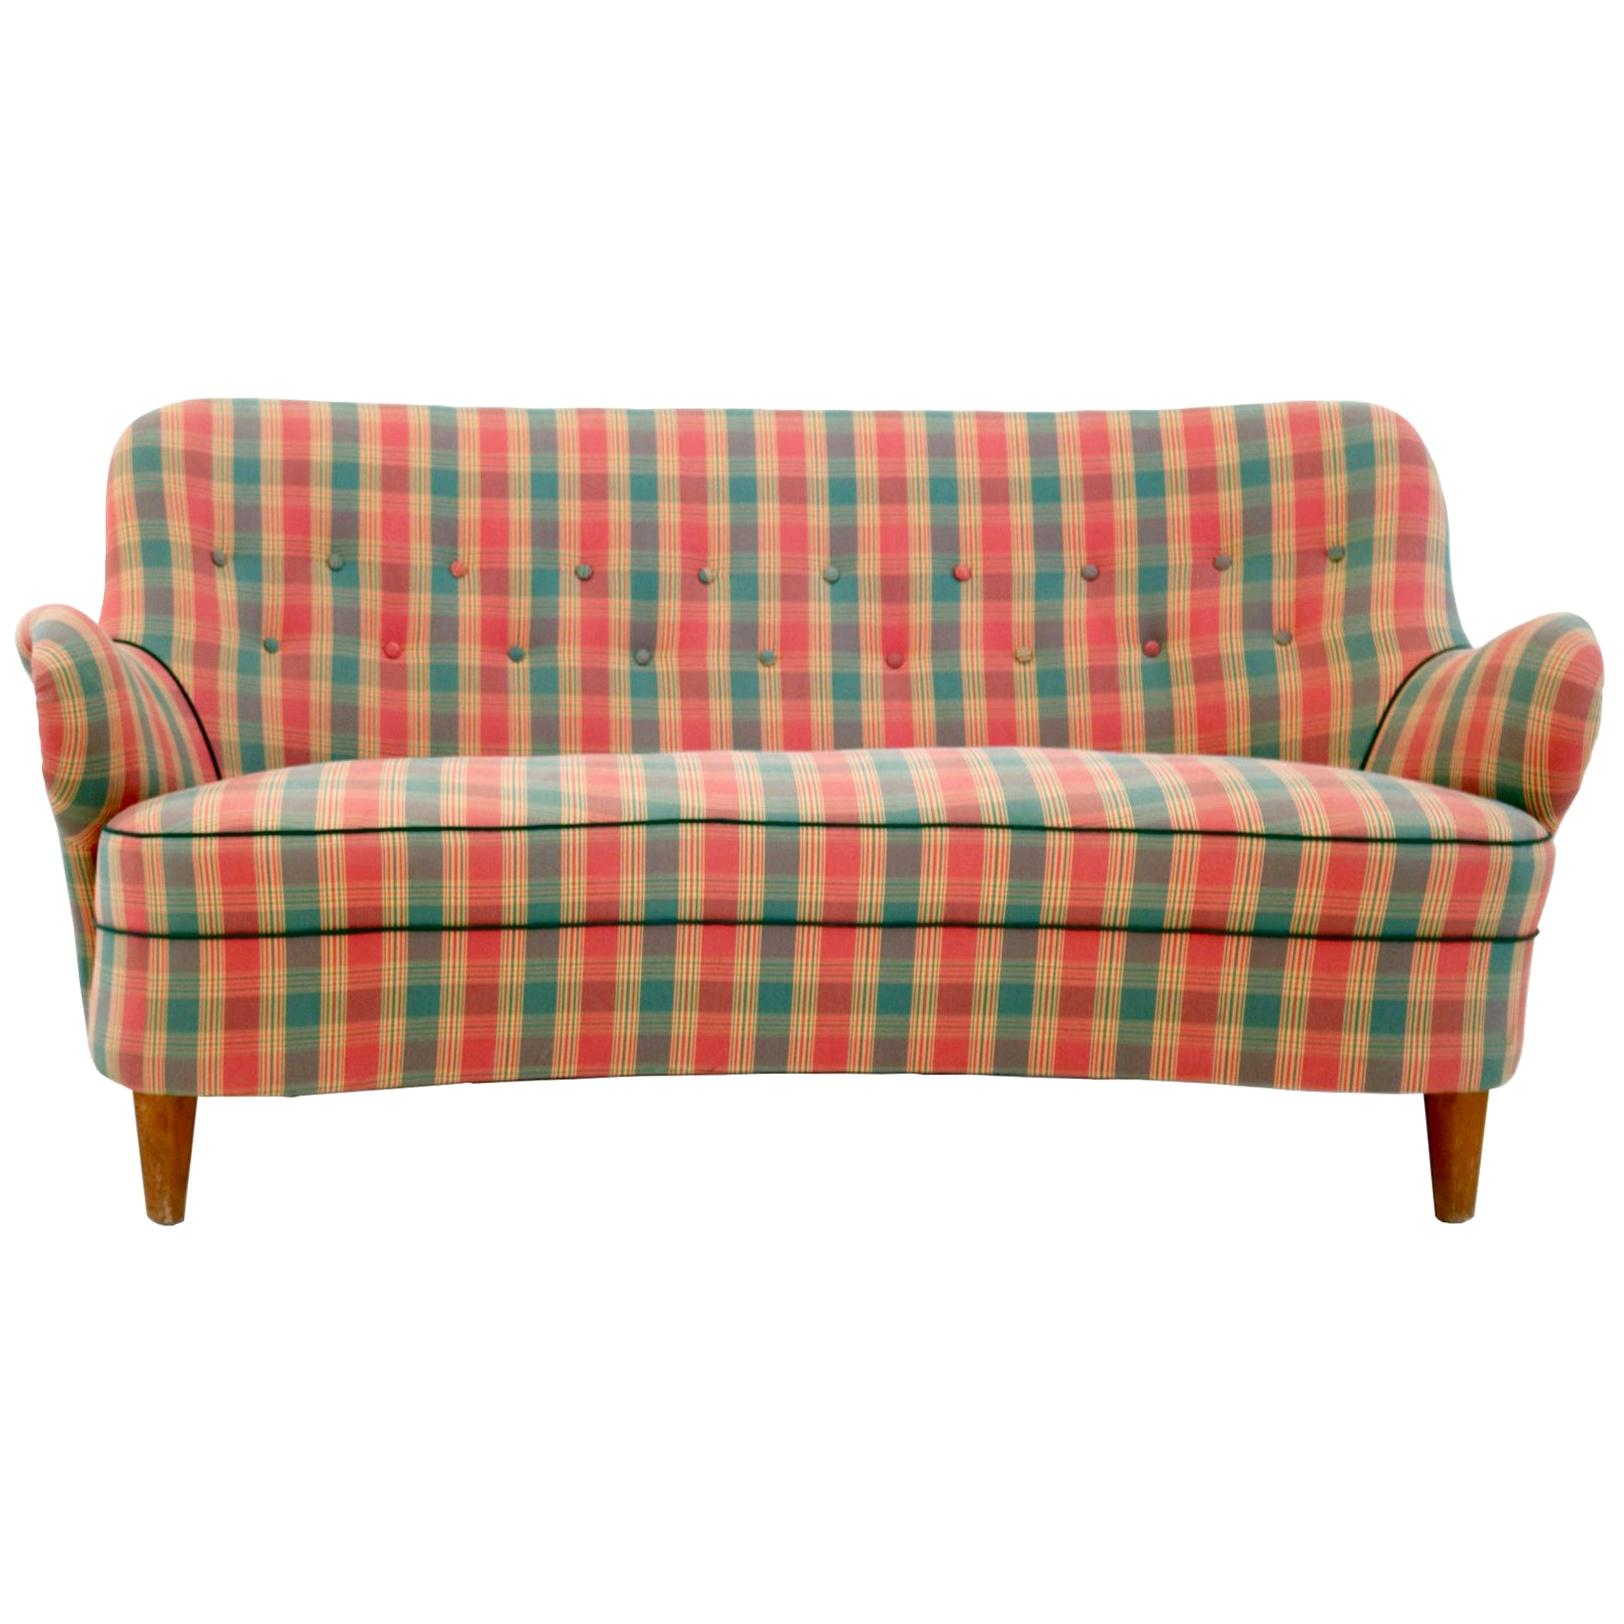 Midcentury Scottish Patterned Red, Green and Yellow Fabric Sofa, Italy 1950s